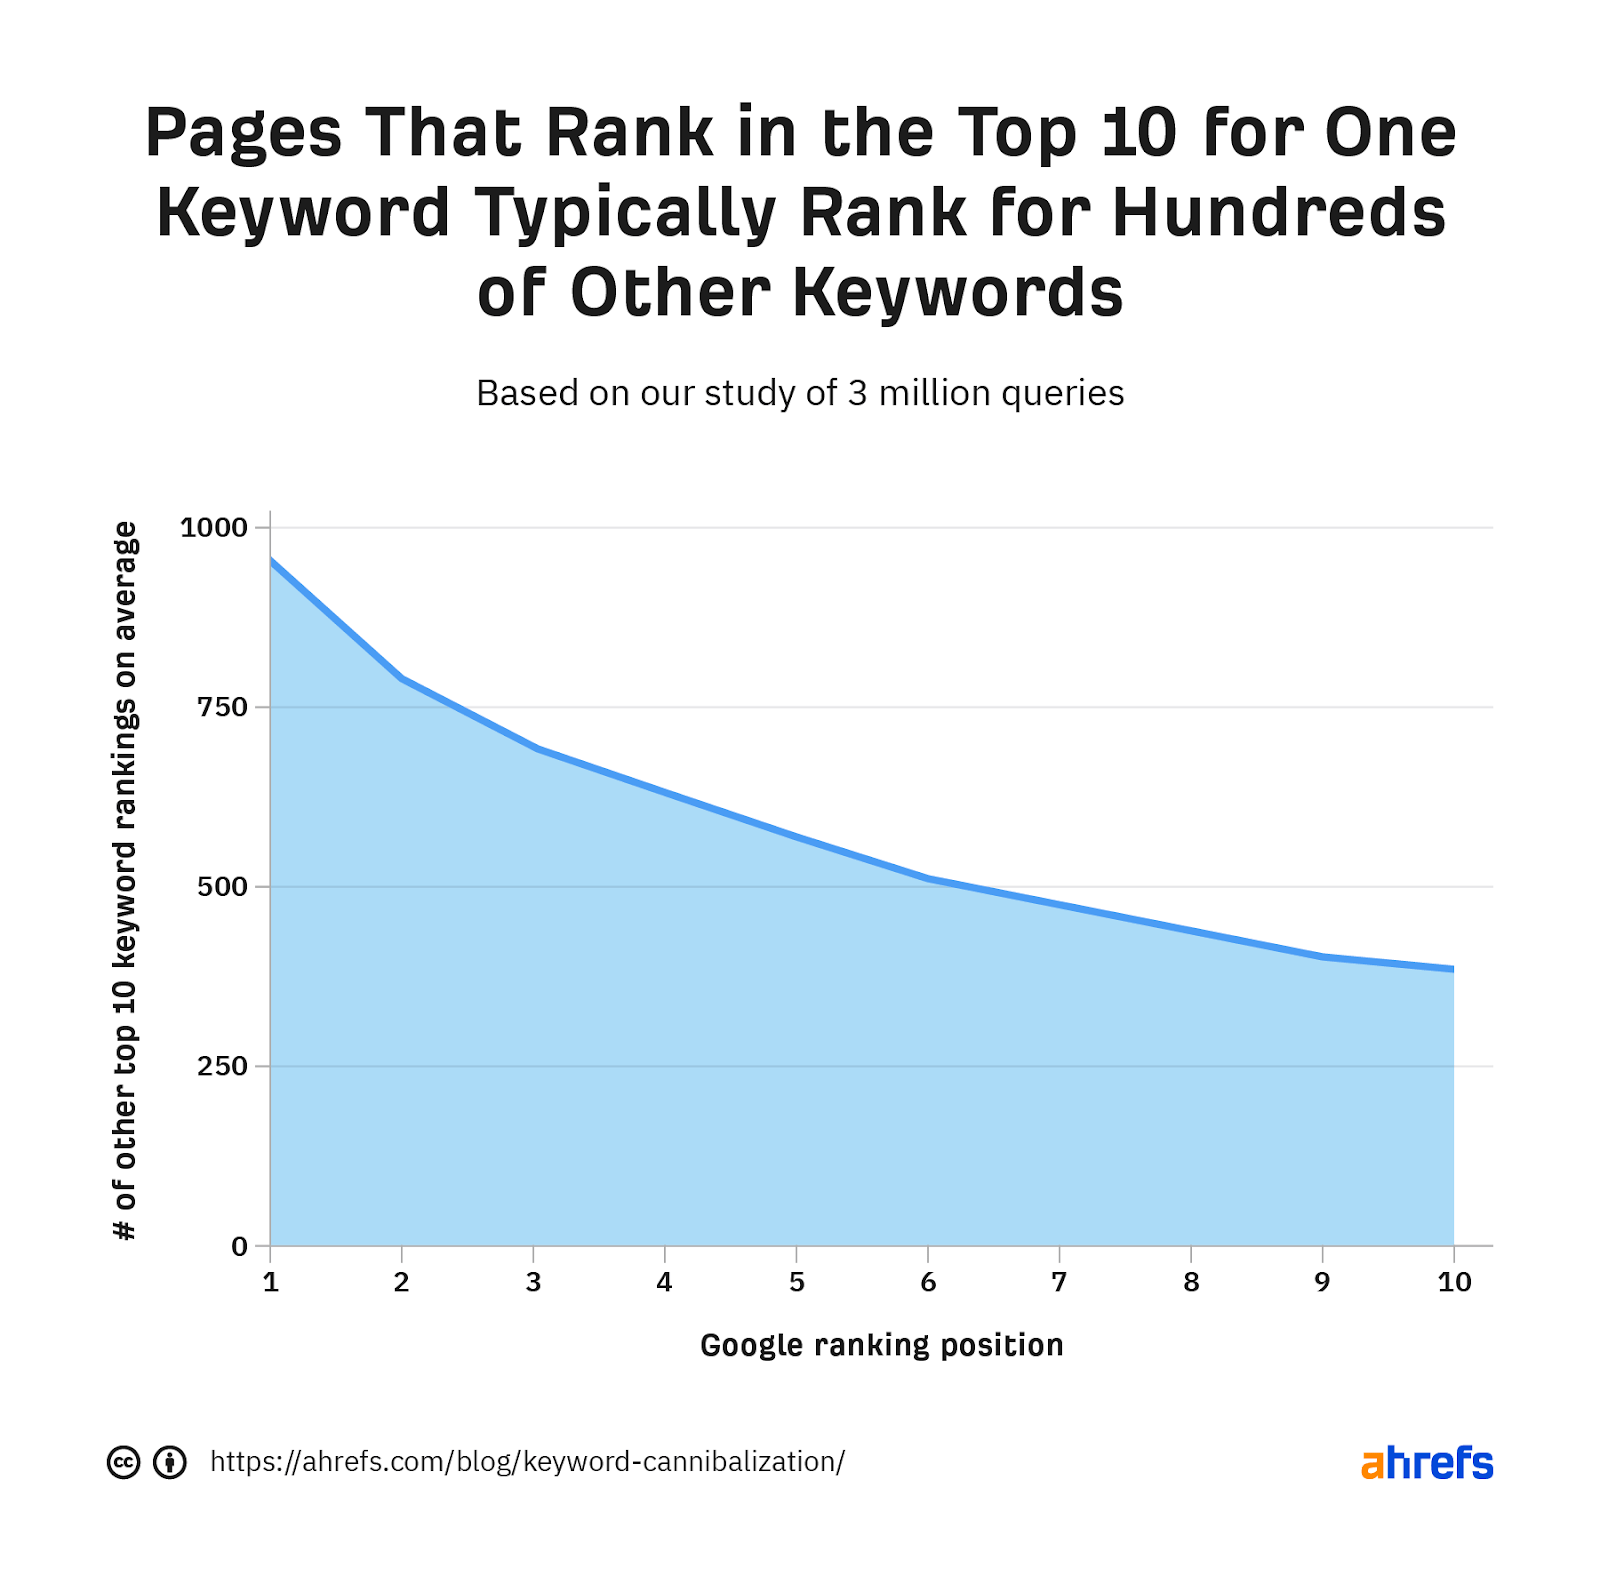 Data on how many keywords a top 10 ranking page ranks for